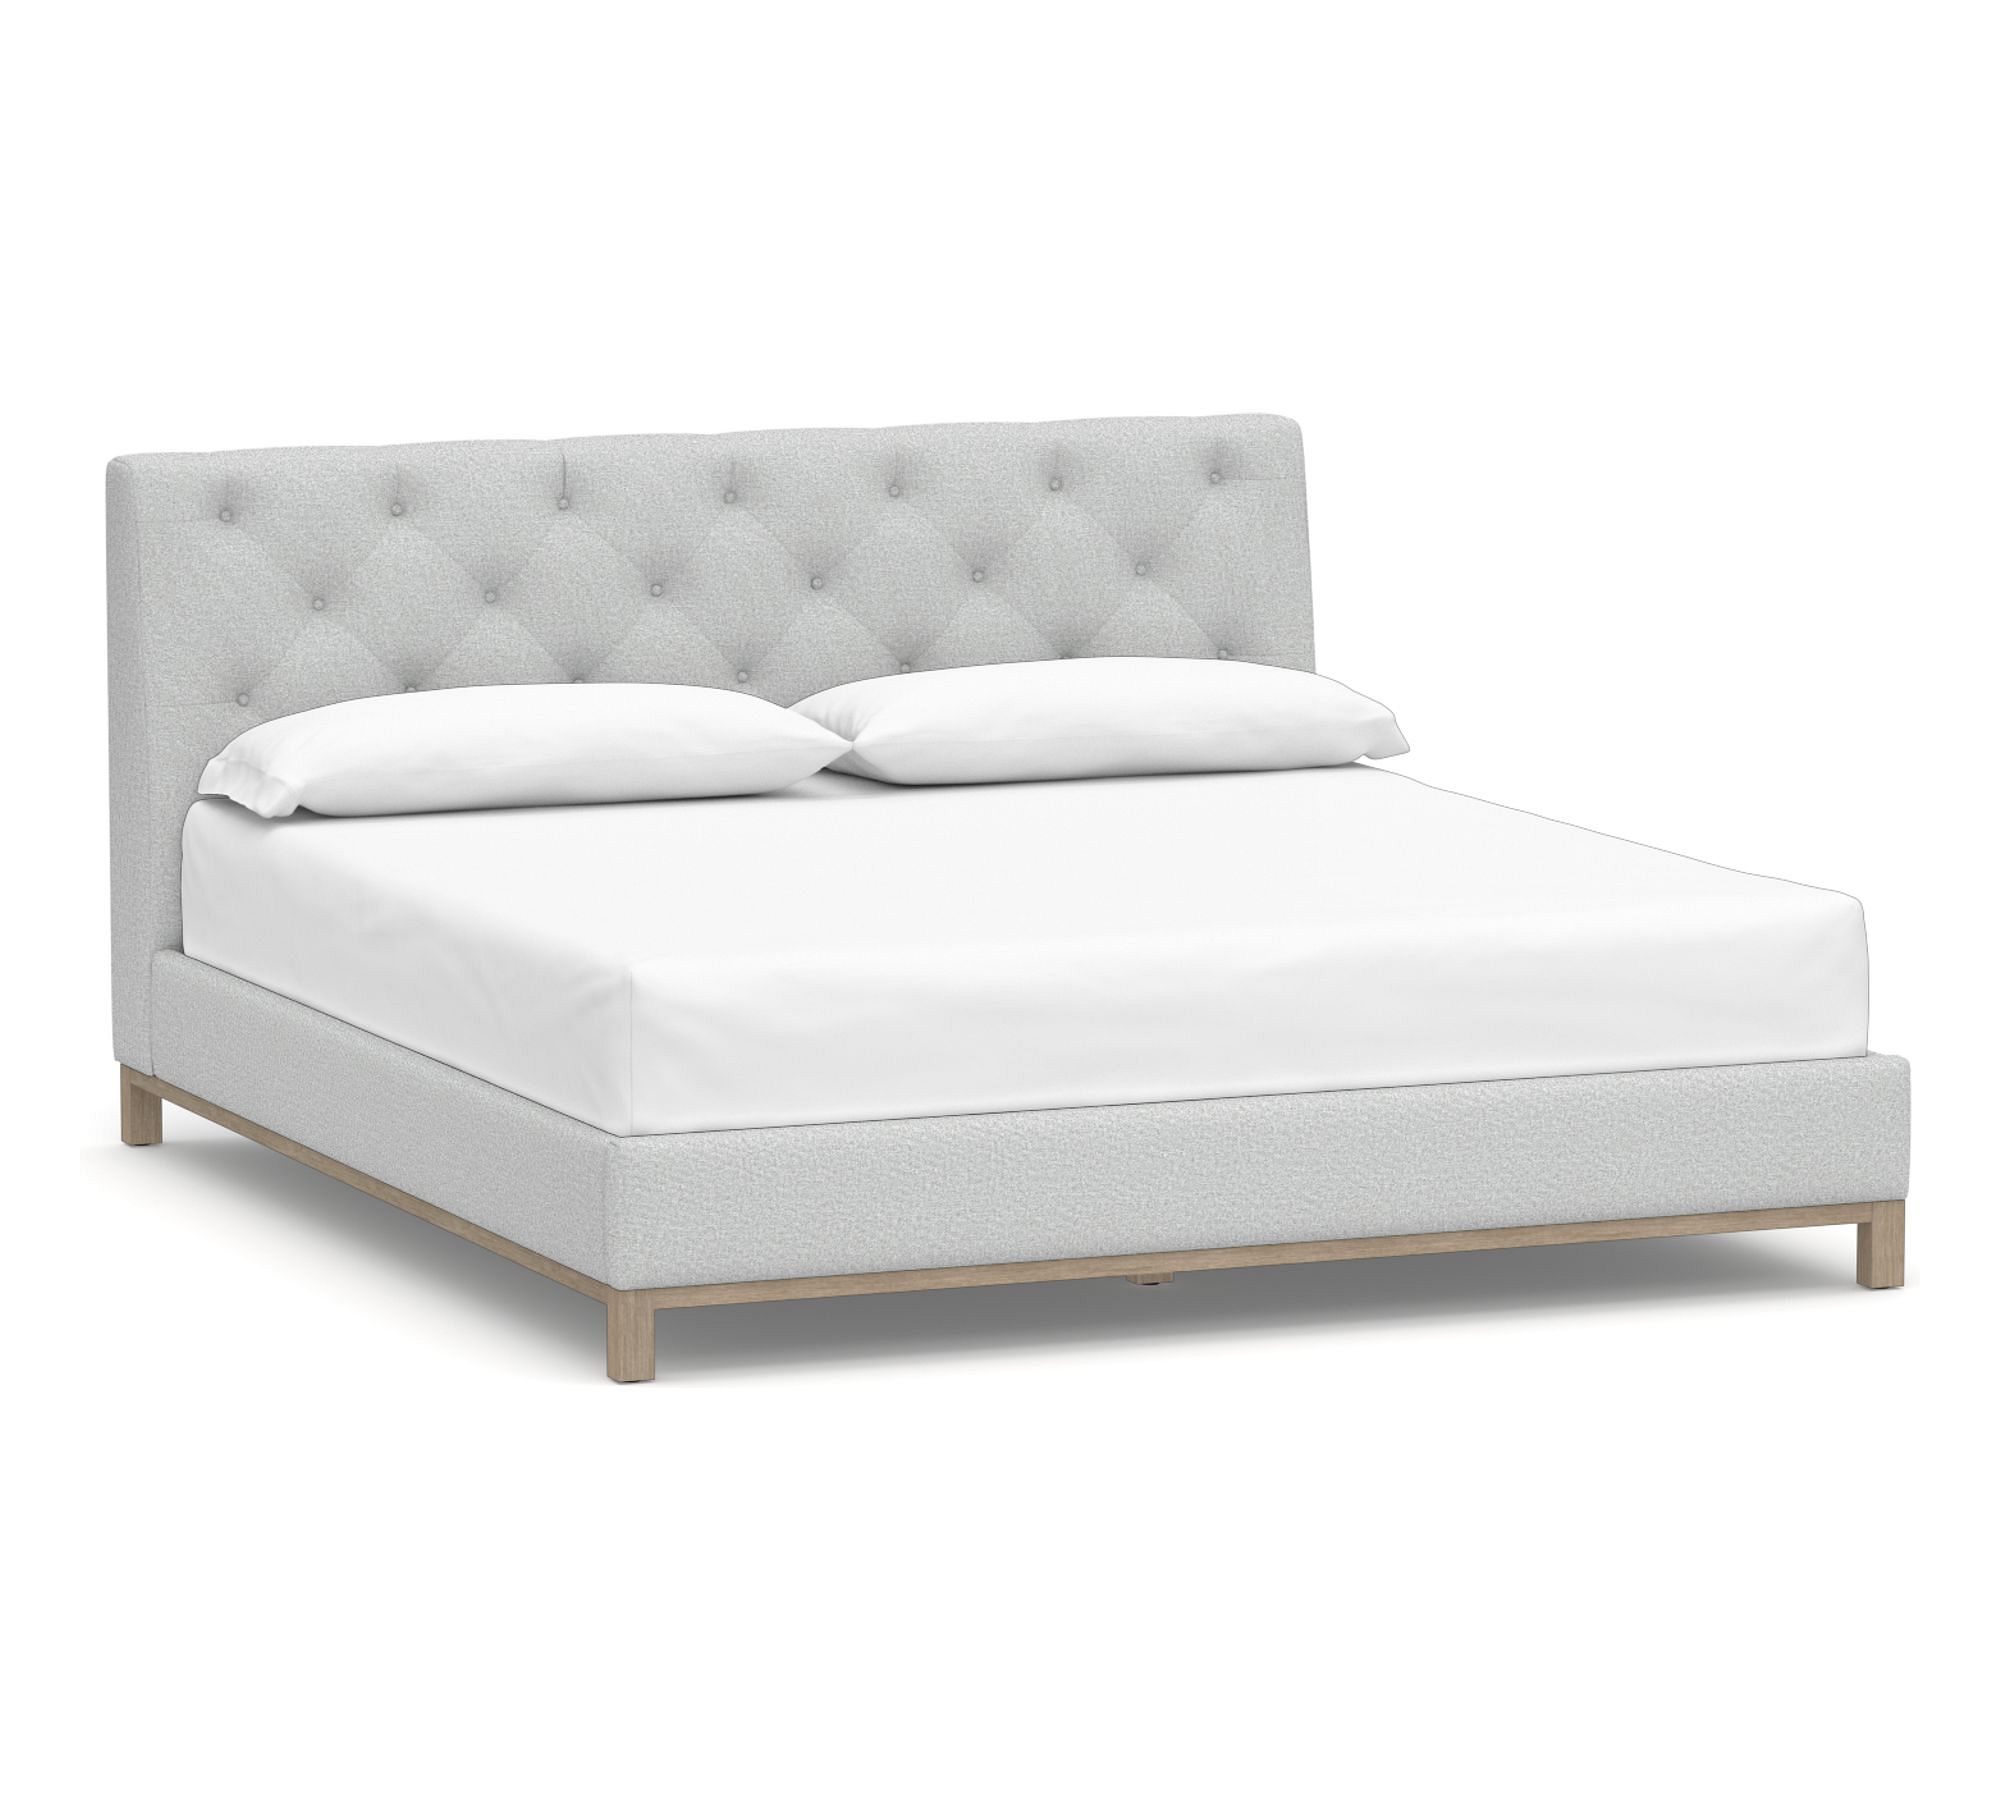 Dempsey Tufted Upholstered Bed